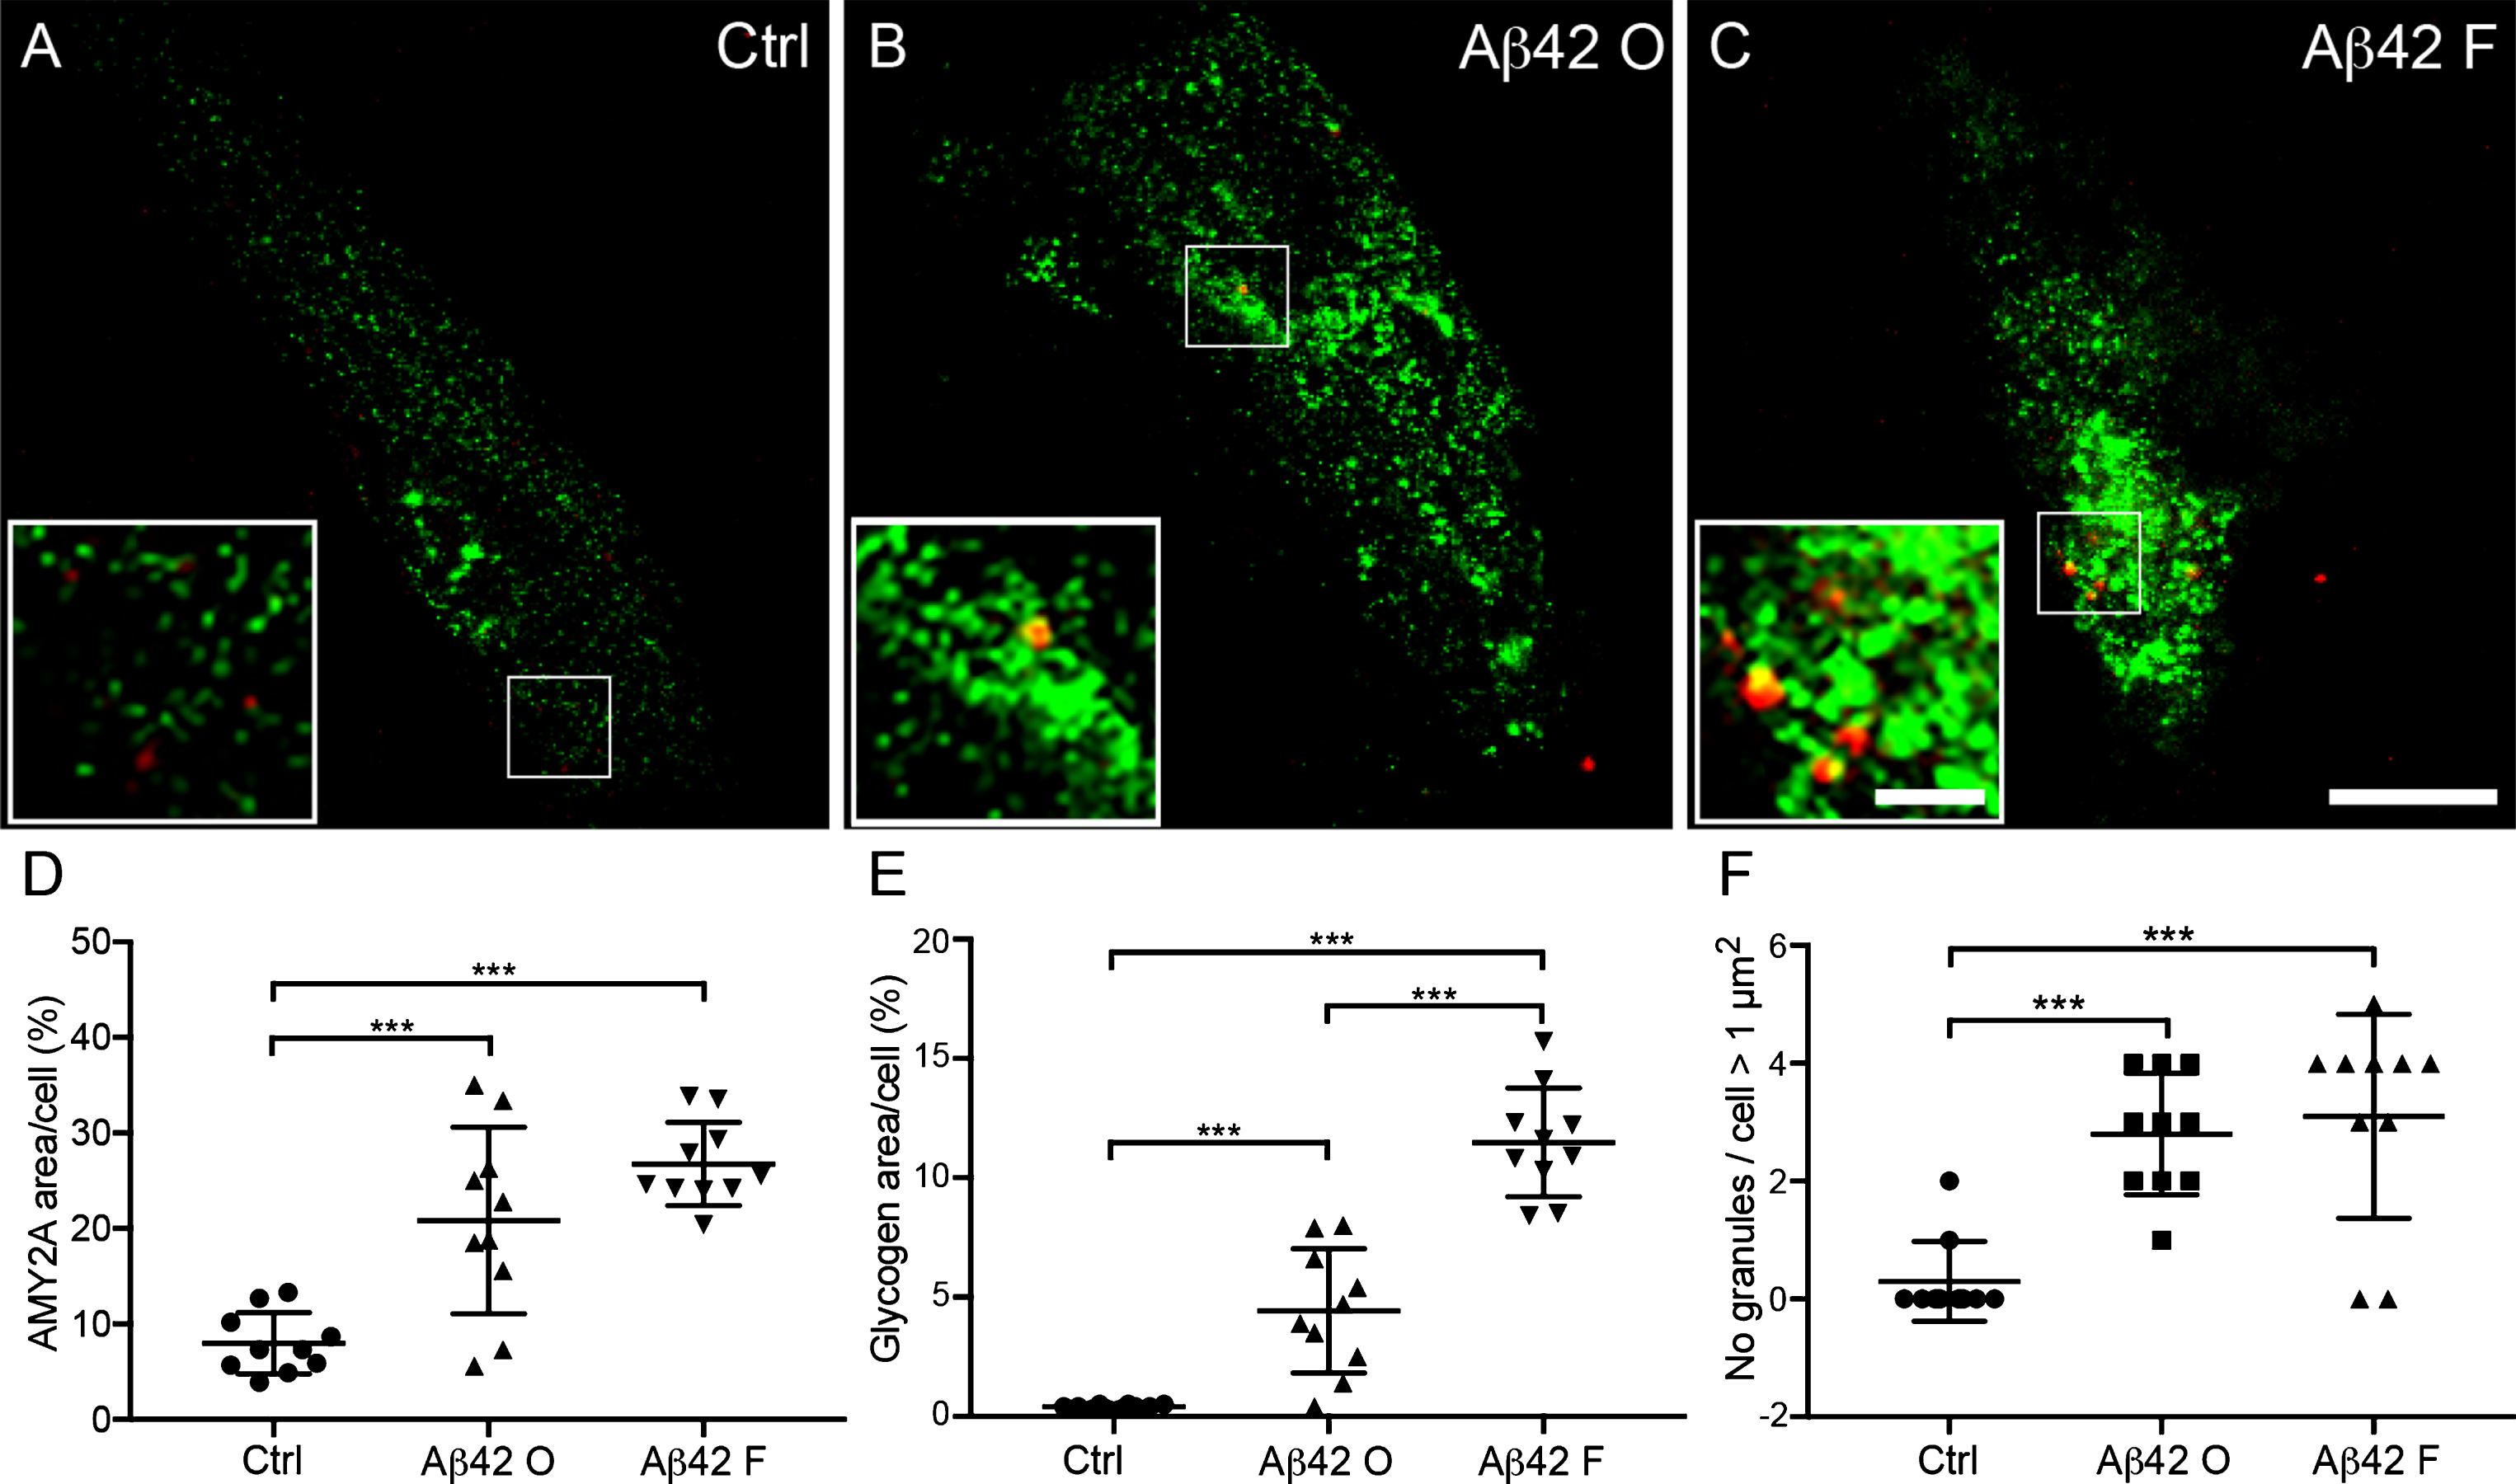 Increased α-amylase immunoreactivity and glycogen load in cultured astrocytes after Aβ42 stimulation. Confocal images in (A–C) show double immunofluorescent AMY2A/glycogen staining of cells treated with vehicle control (Ctrl), 10 μM Aβ oligomers (Aβ42 O), and 10 μM Aβ42 fibrils (Aβ42 F). Scale bar = 40 μm. The small square marks an area shown at higher magnification (bottom left), where increased glycogen granules (red indicated with arrowheads in A–C) and AMY2A immunoreactivity (green in A–C) can be visualized to a higher degree after Aβ42 fibril stimulation (C) compared to Ctrl (A). Scale bar = 8 μm. Column scatter plots in (D-E) show area percentage of AMY2A and glycogen immunoreactivity in the stimulated cells. Significant higher area percentage of AMY2A (D) and glycogen (E) was seen in Aβ42 O stimulated cells compared with Ctrl and an even more pronounced increase of AMY2A area percentage after Aβ42 F stimulation compared with Ctrl. Column scatter plots in (F) show the number of glycogen granules exceeding 1 μm2 /stimulated HA cells. HA cells stimulated with Aβ42 O or Aβ42 F showed greater number of glycogen granules exceeding 1 μm2 compared to controls. The experiment was independently performed three times and 3-4 cells from each experiment and condition (in total 10 per condition) was analyzed. Data was analyzed using one-way ANOVA with Tukey post-test and presented as mean ± SD. **p < 0.01, ***p < 0.001.